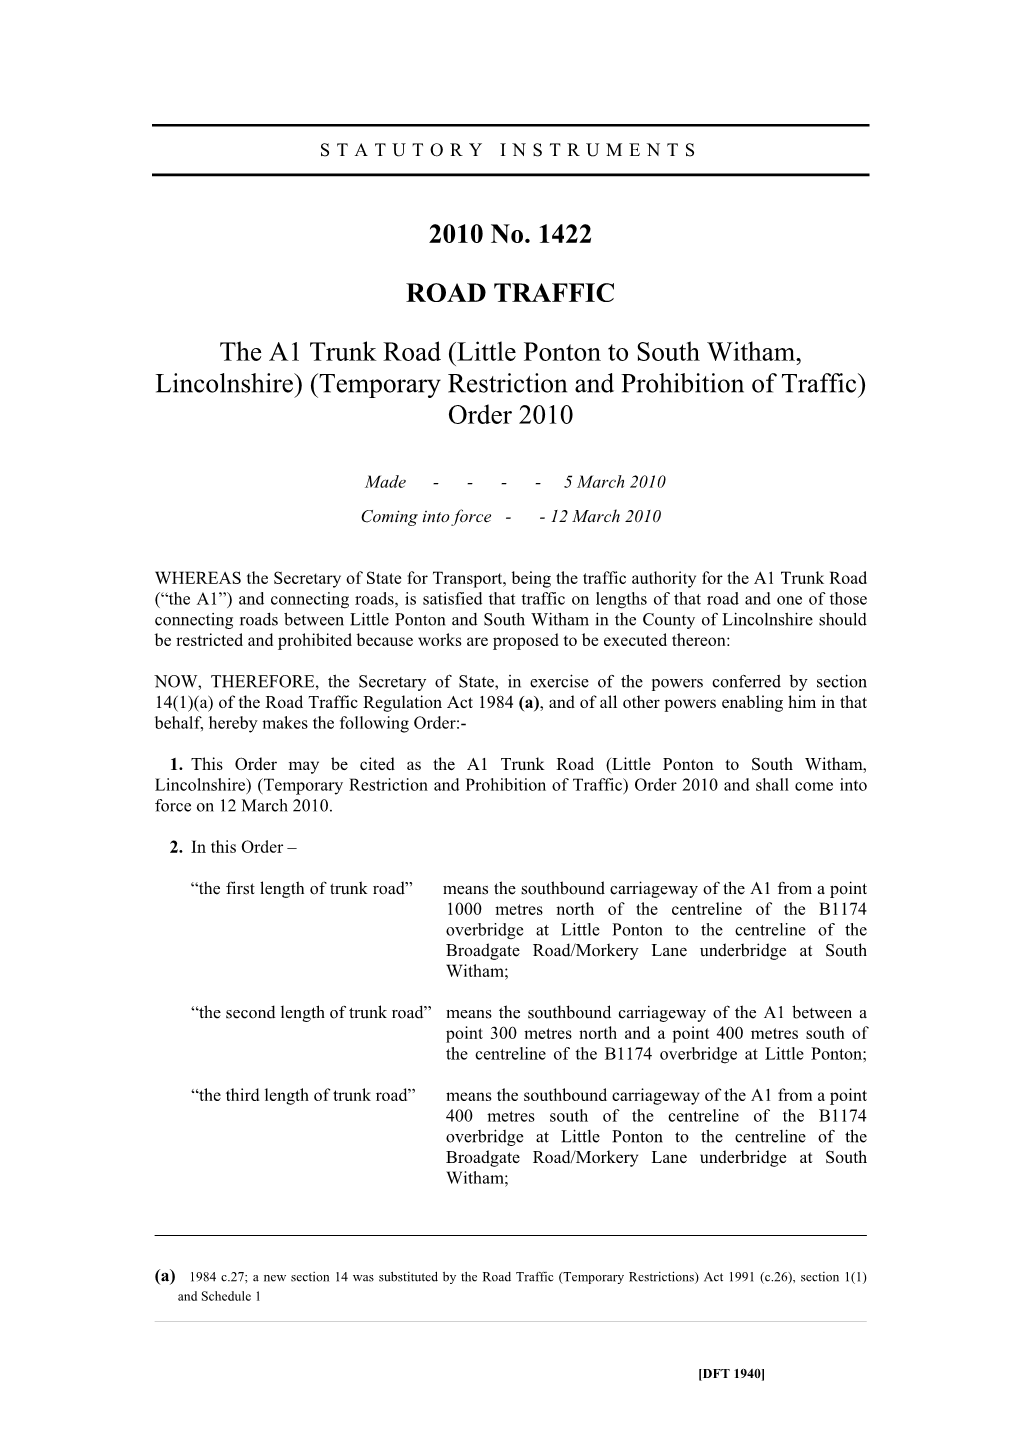 Little Ponton to South Witham, Lincolnshire) (Temporary Restriction and Prohibition of Traffic) Order 2010